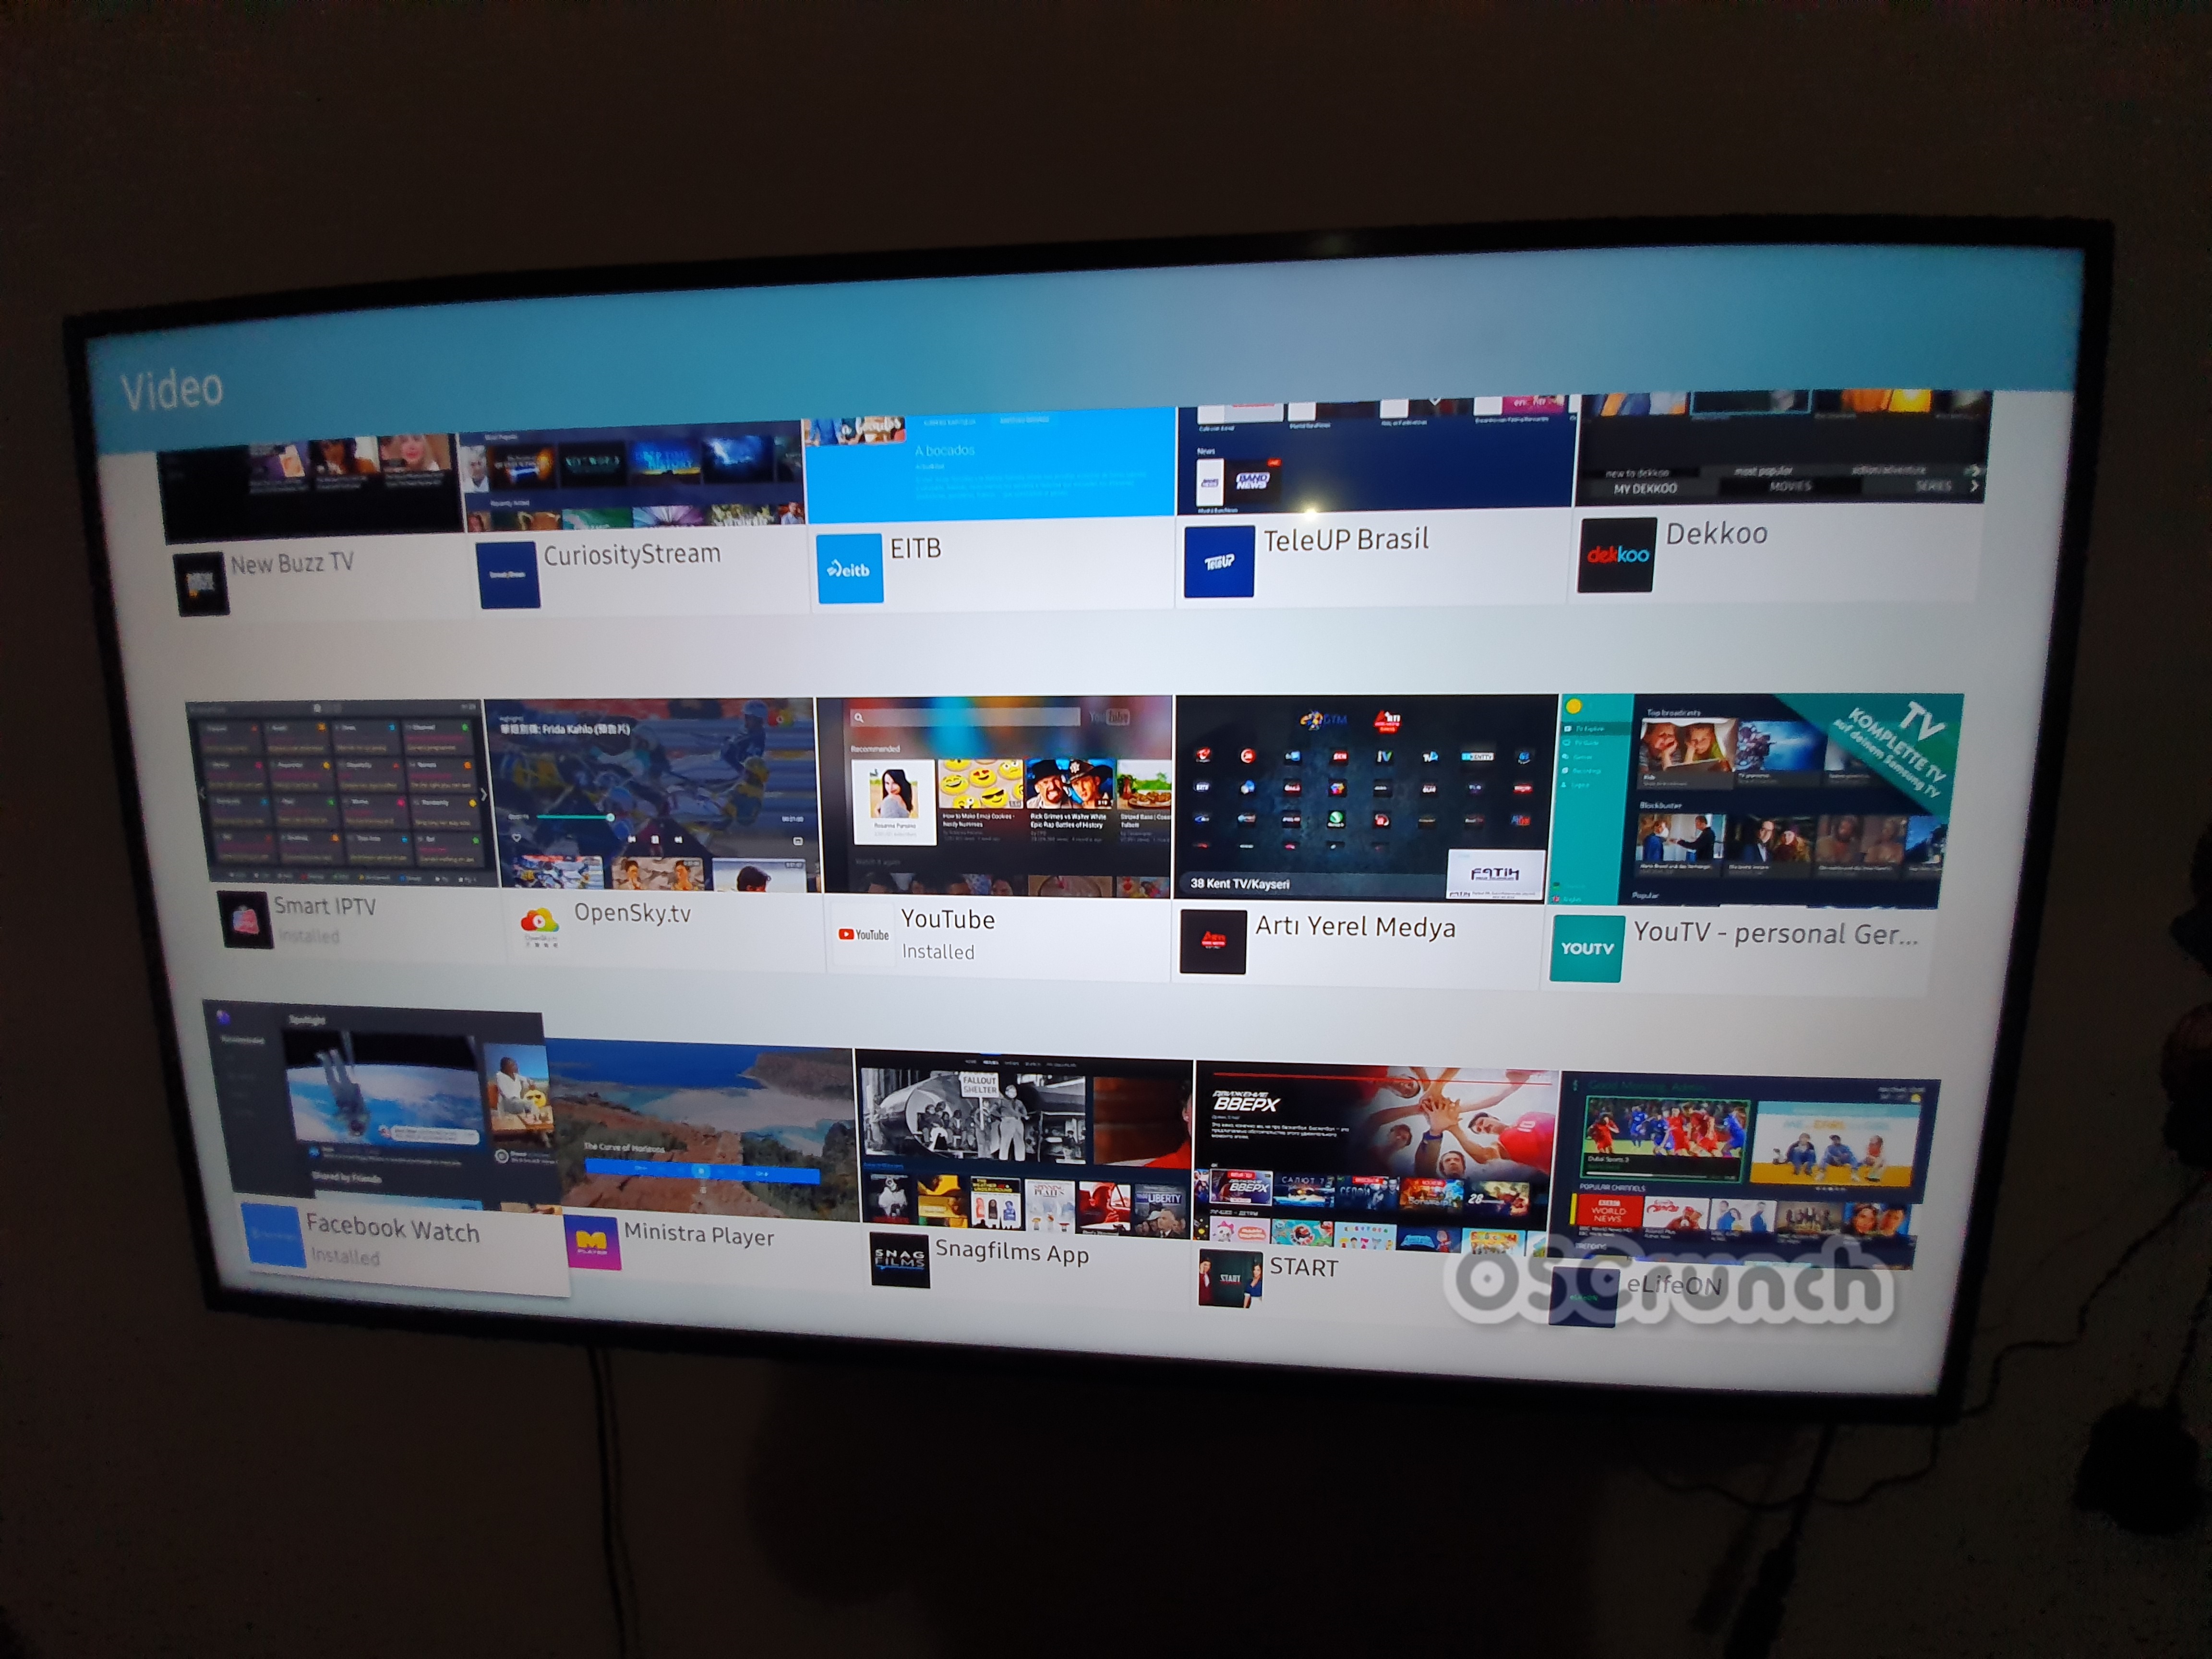 How To Download & Play Games On Samsung Smart TVs 